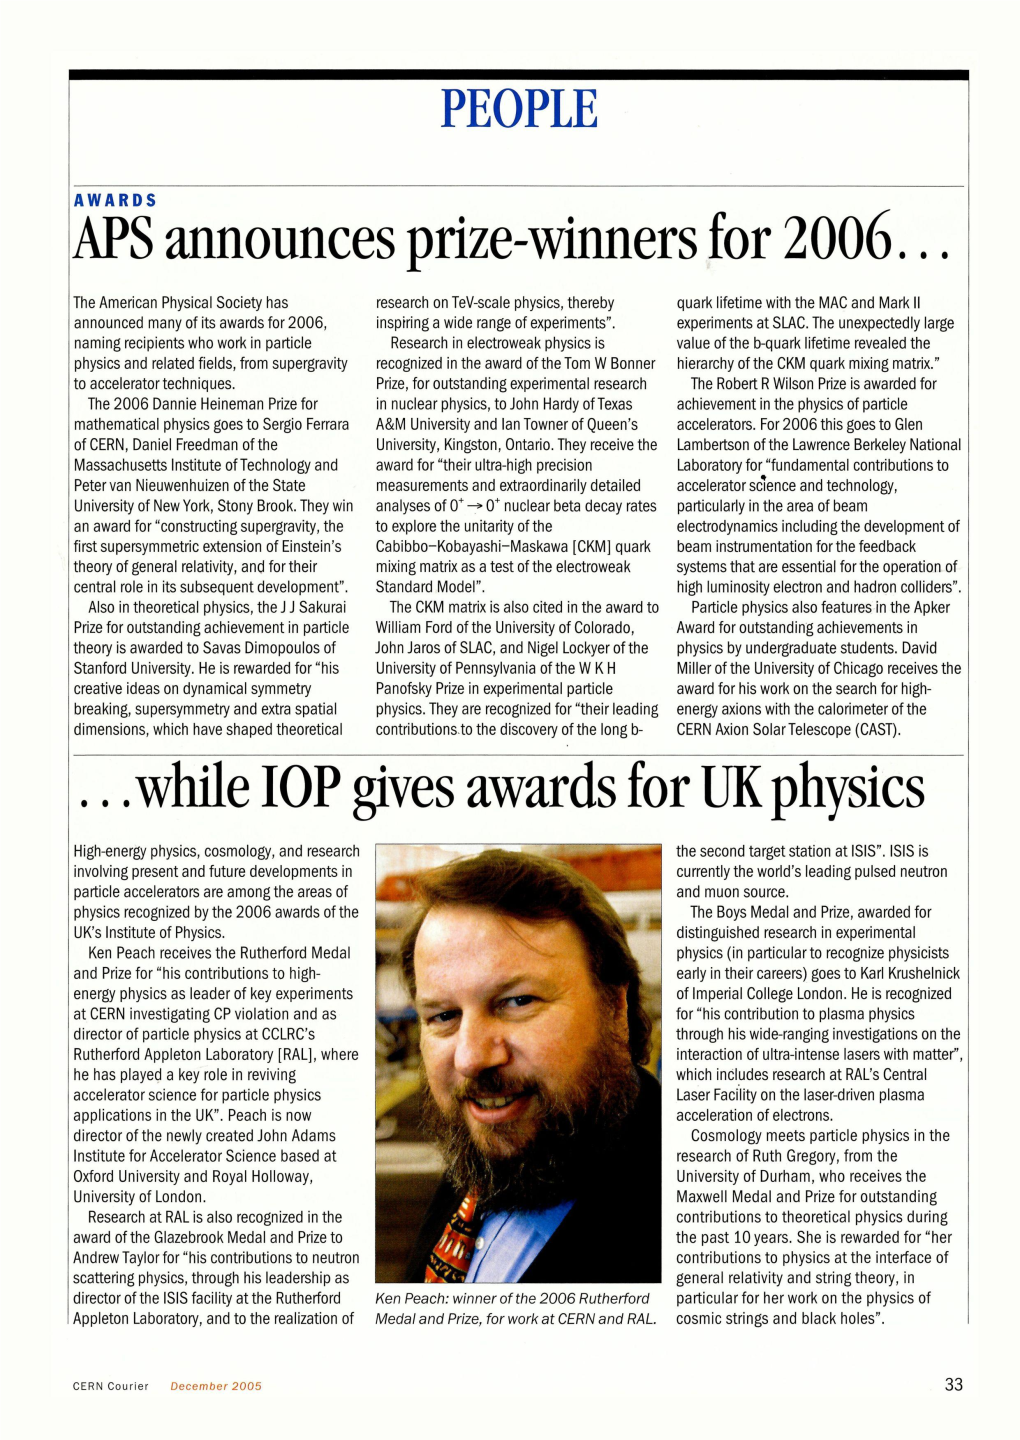 APS Announces Prize-Winners for 2006...While IOP Gives Awards